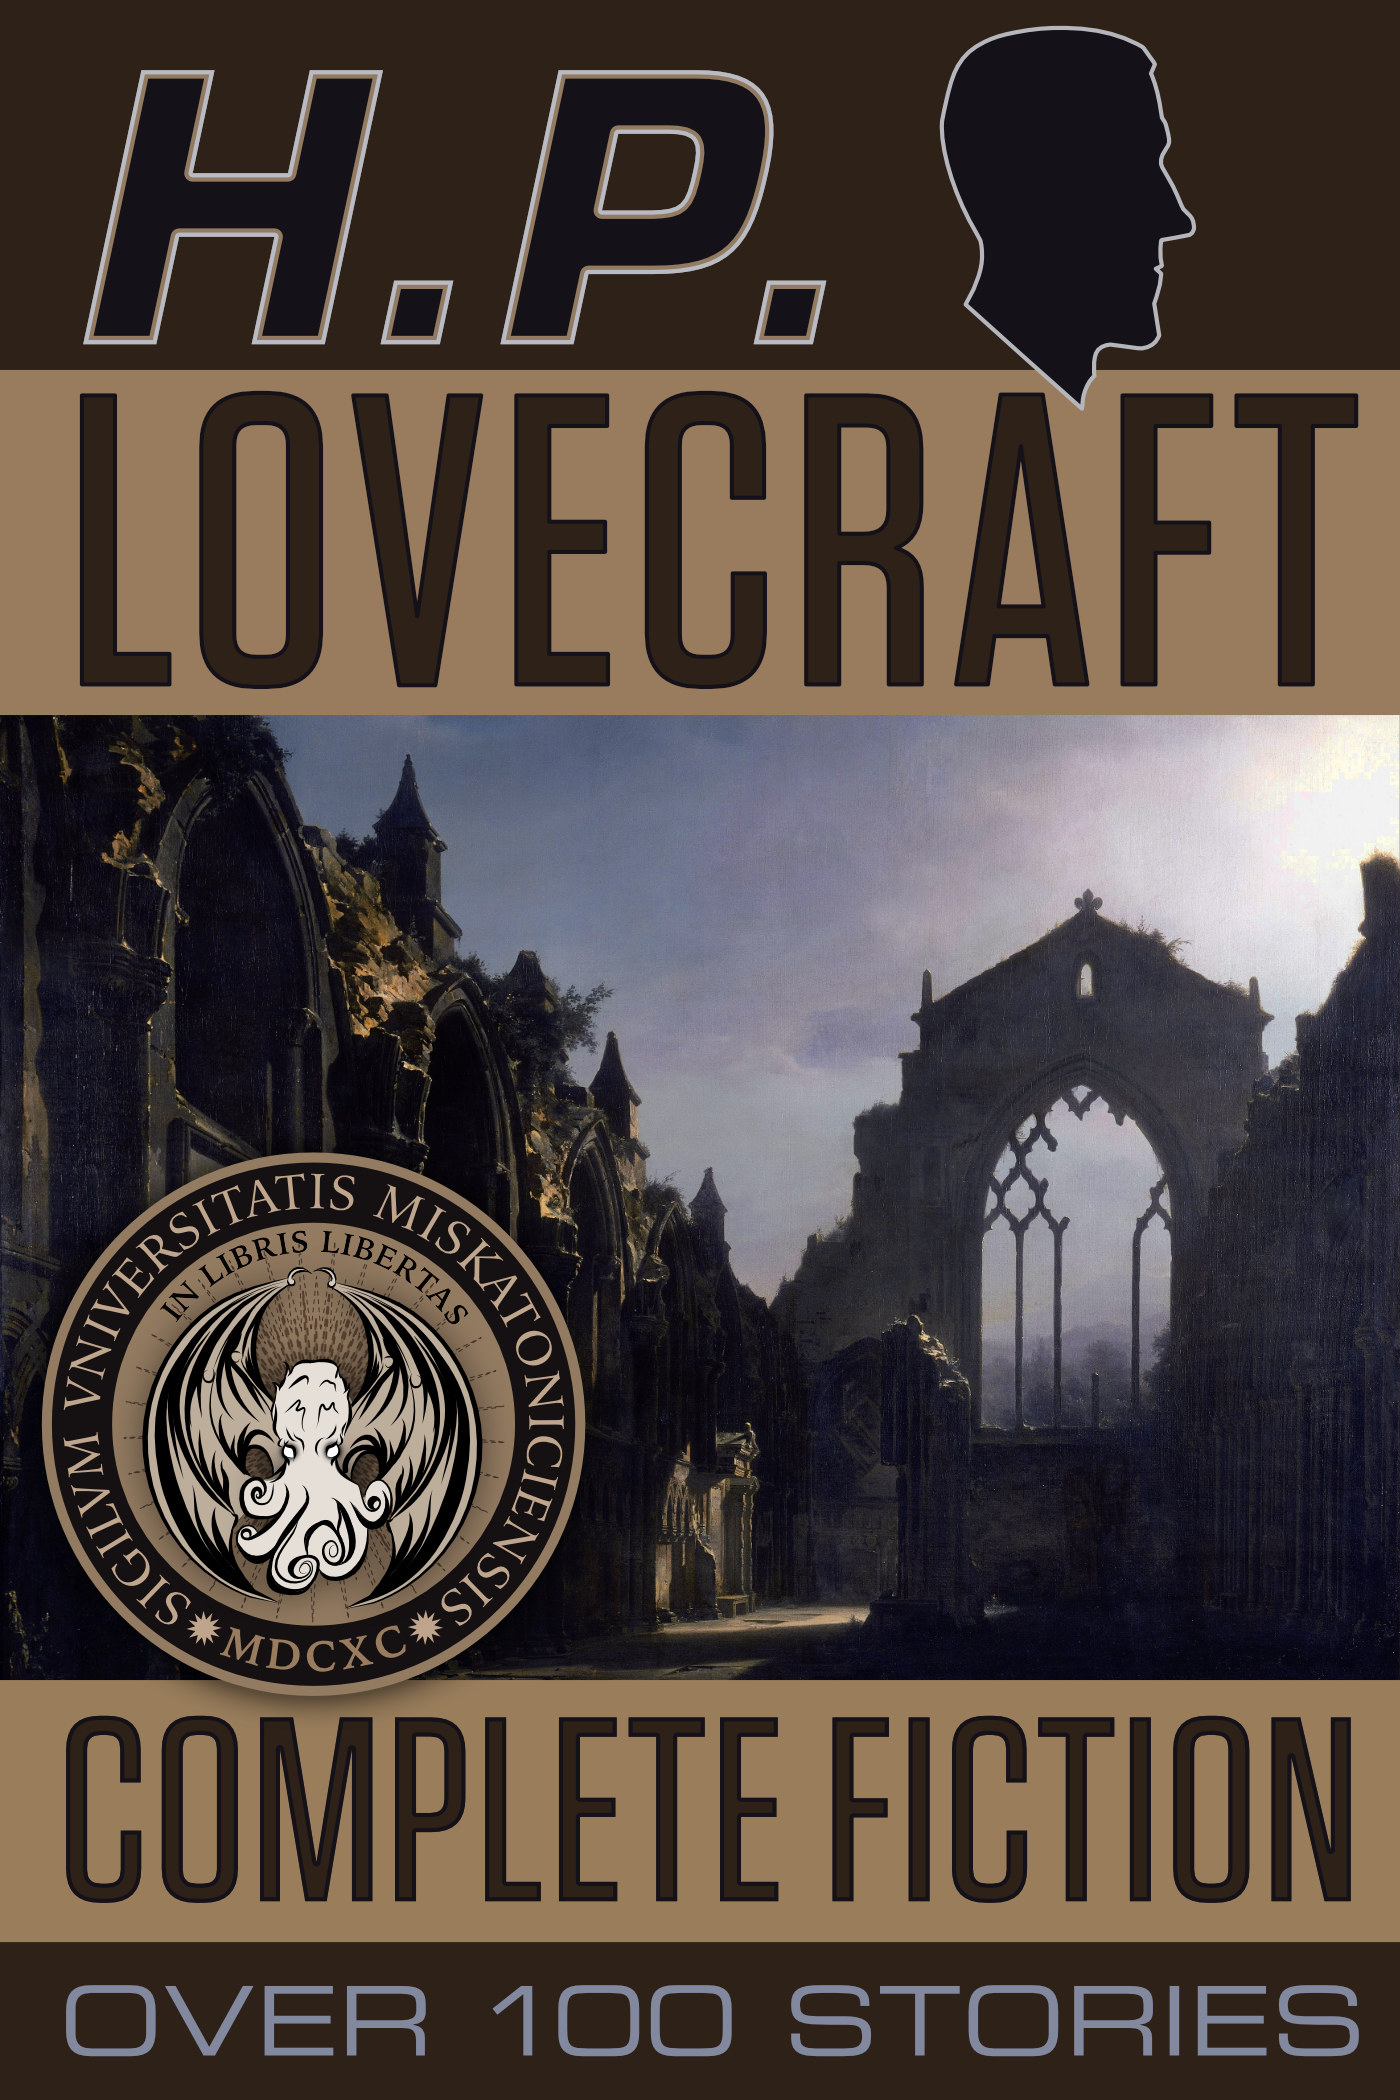 Complete Fiction by H. P. Lovecraft